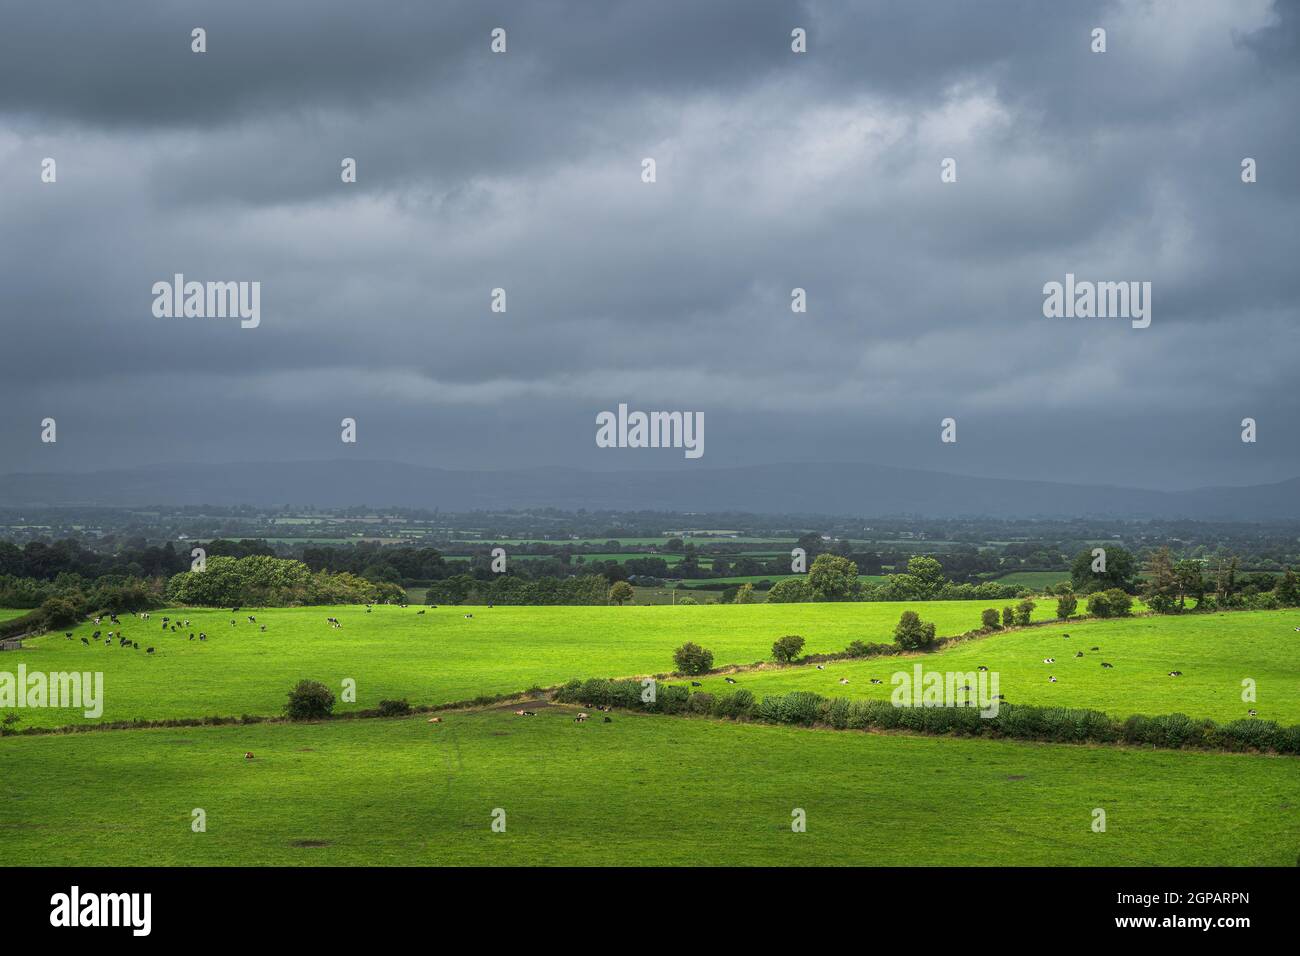 Herd of cattle grazing and resting on fresh green field or pasture illuminated by sunlight with dark, moody sky in background, Tipperary, Ireland Stock Photo